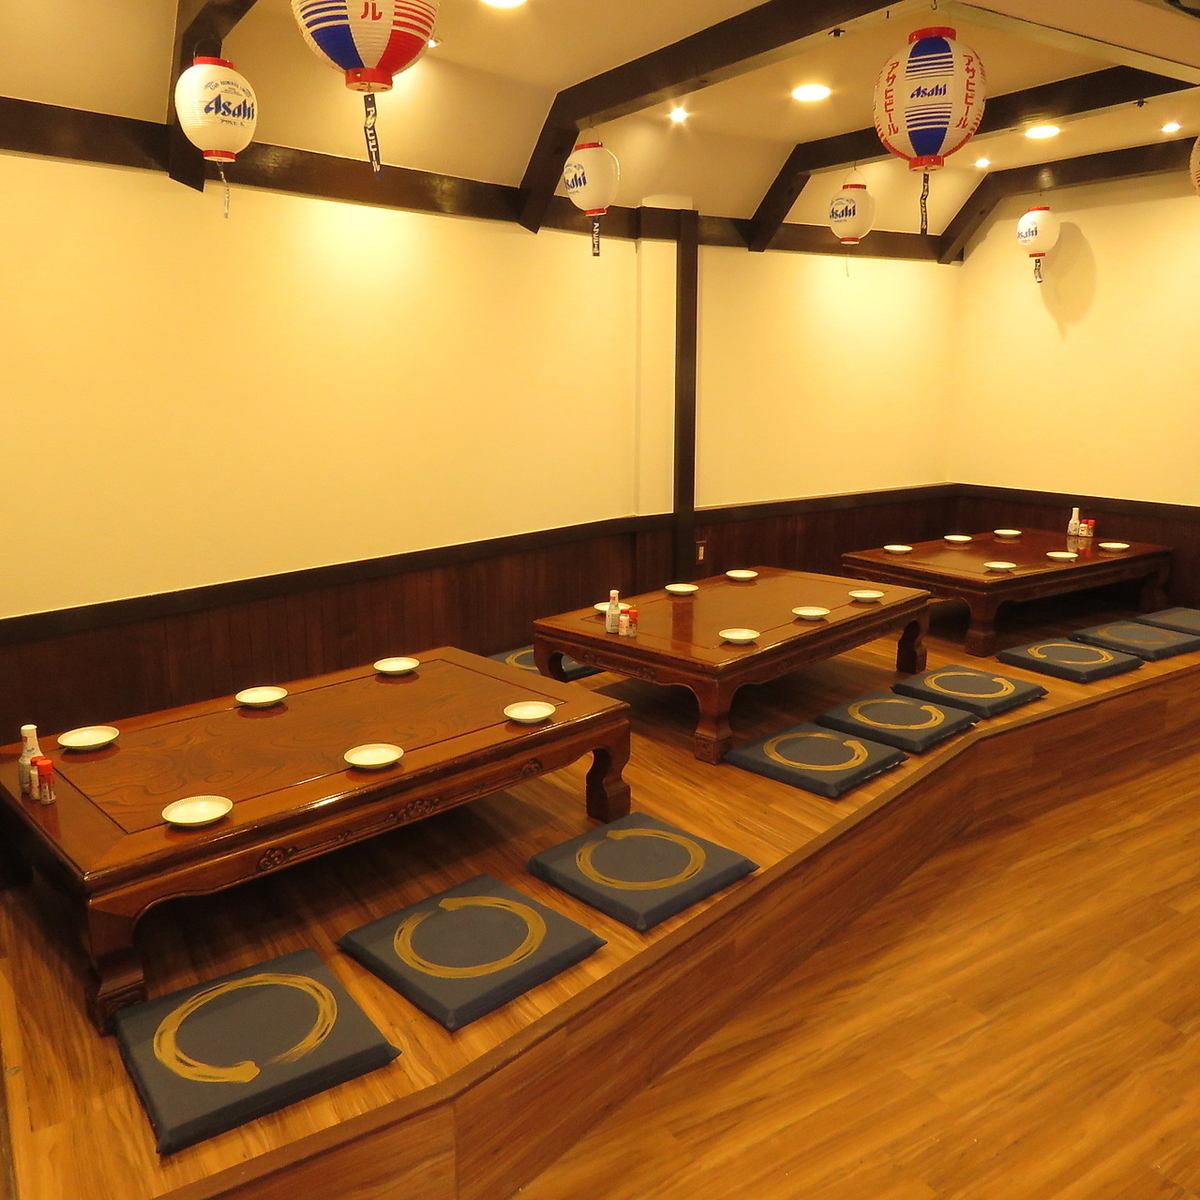 It is also possible to rent out the tatami room!